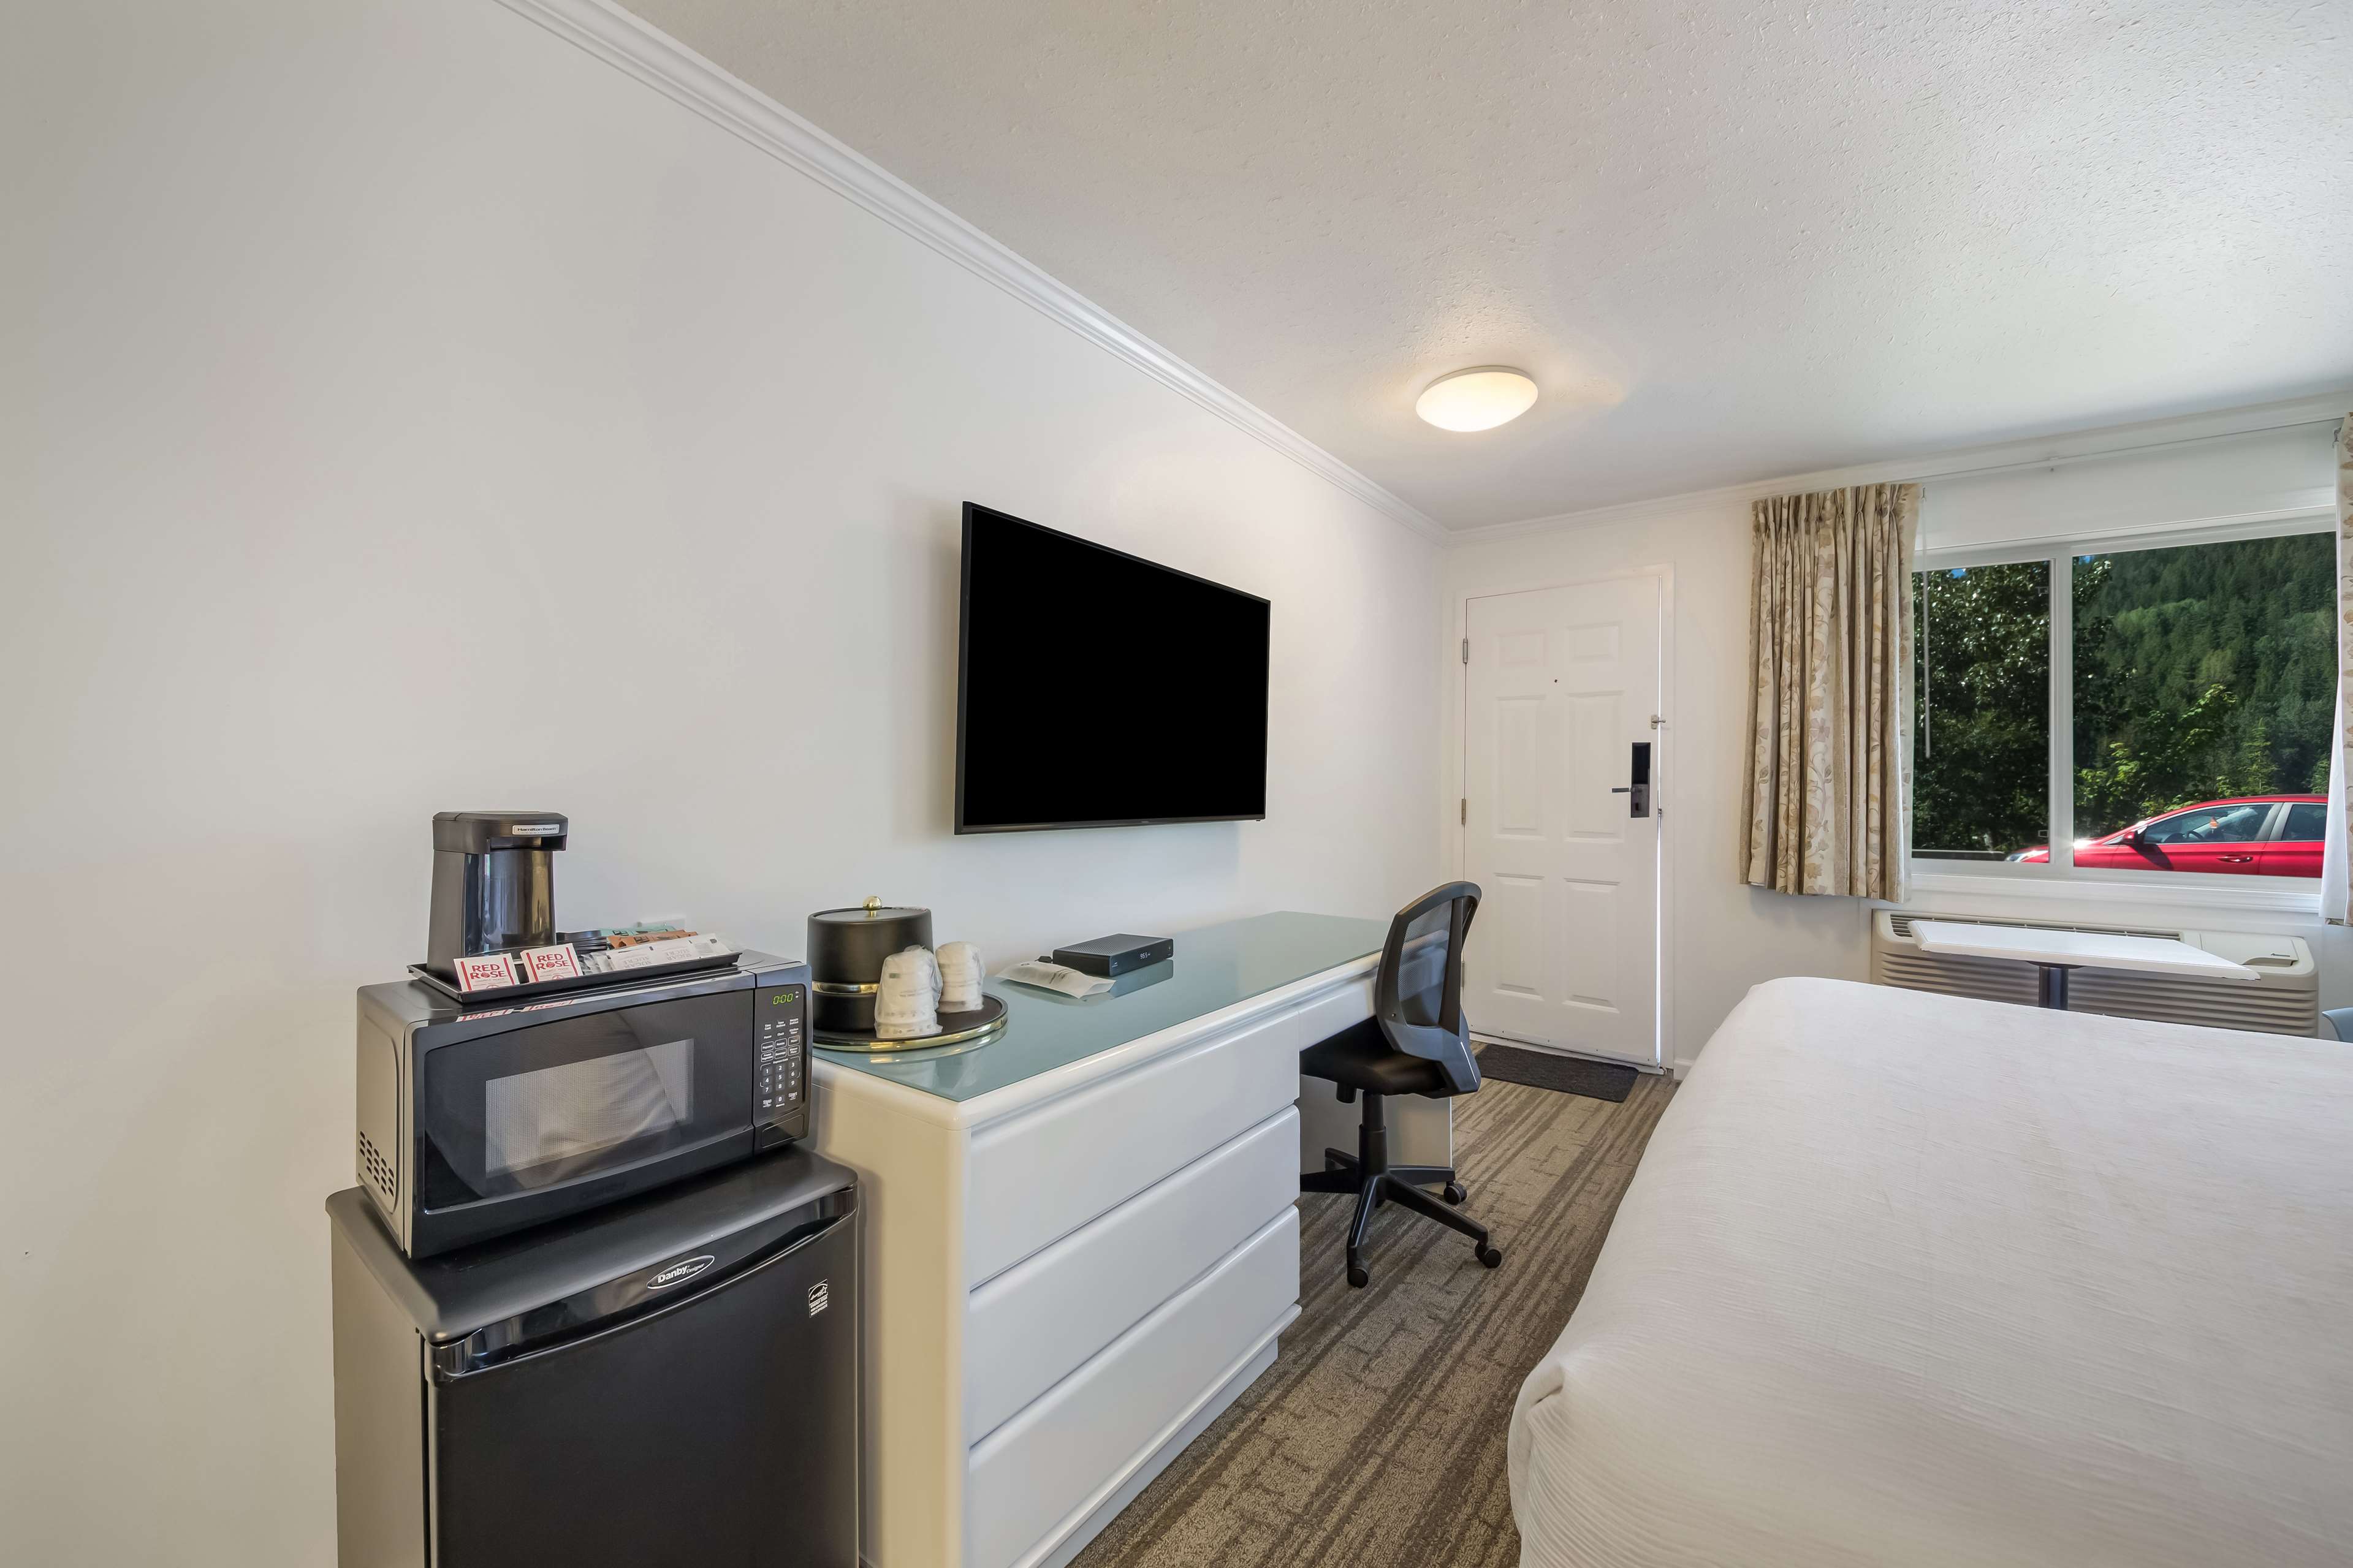 Images SureStay By Best Western Rossland Red Mountain